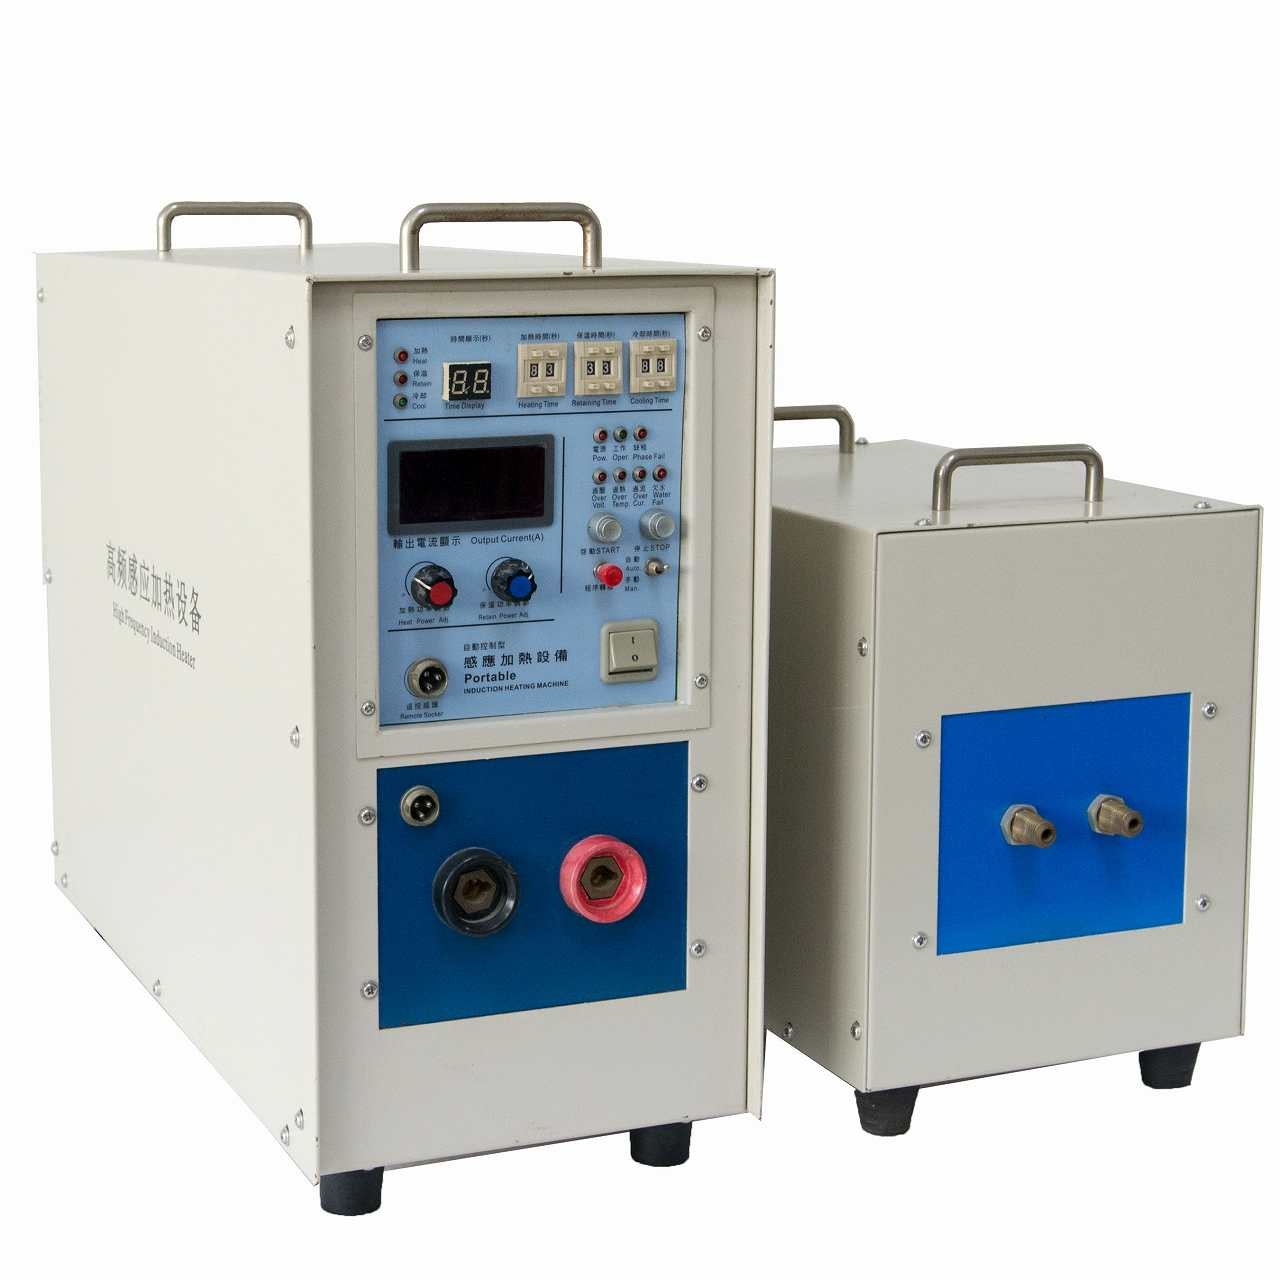 35kw High Frequency Induction Heater DDFT-35